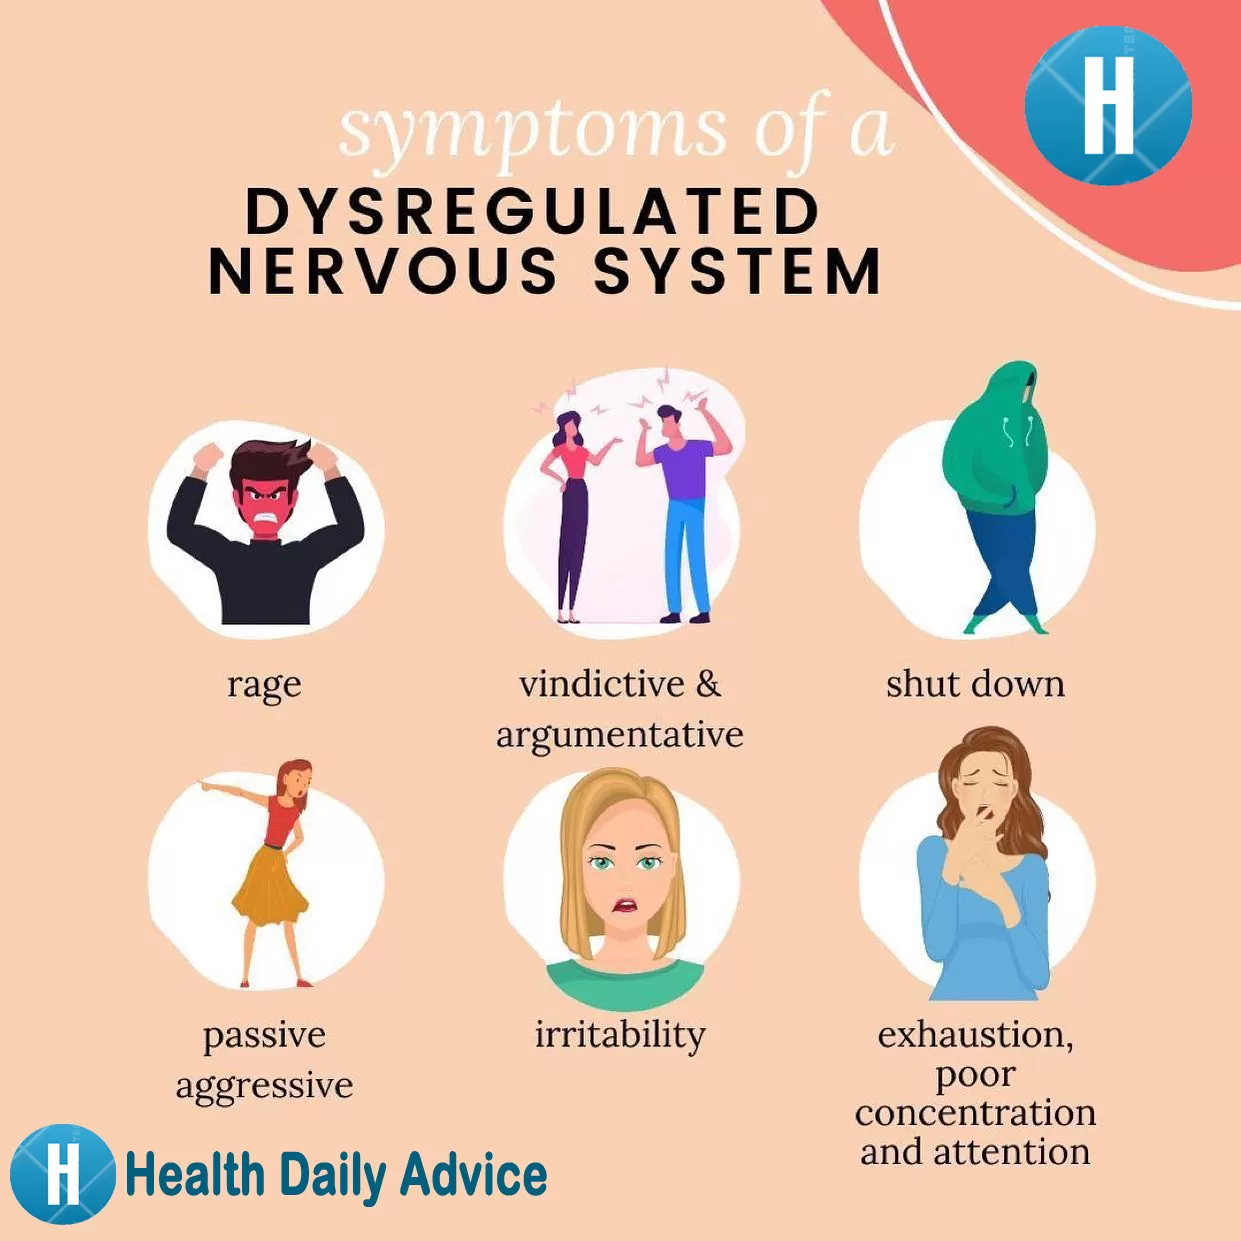 8 Signs of a Dysregulated Nervous System